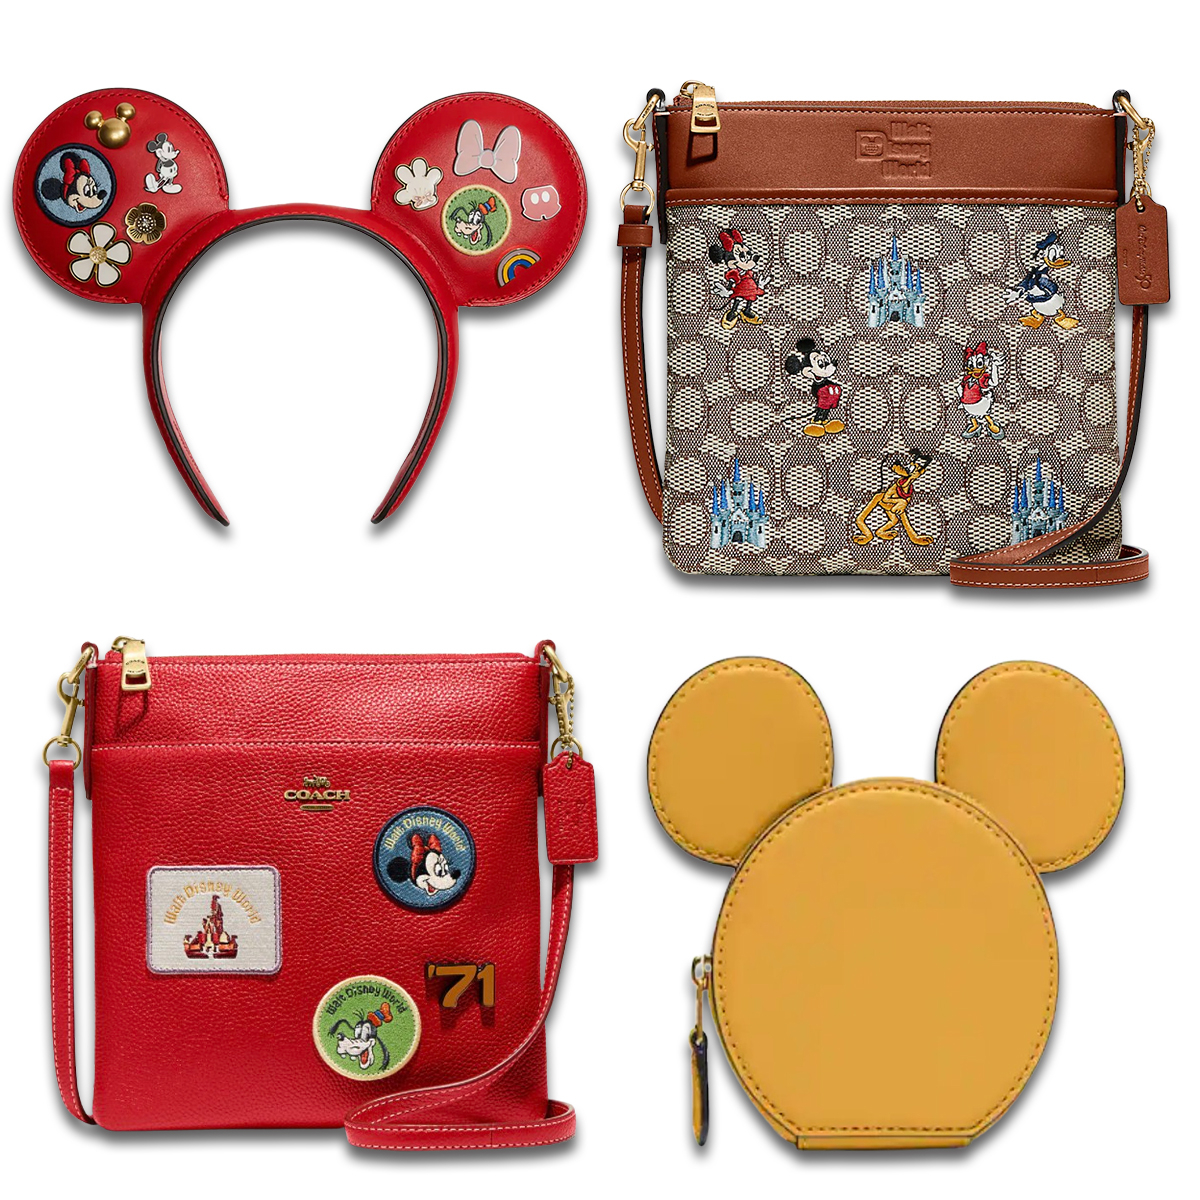 COACH Disney Collection: Bags. Clothing & Accessories